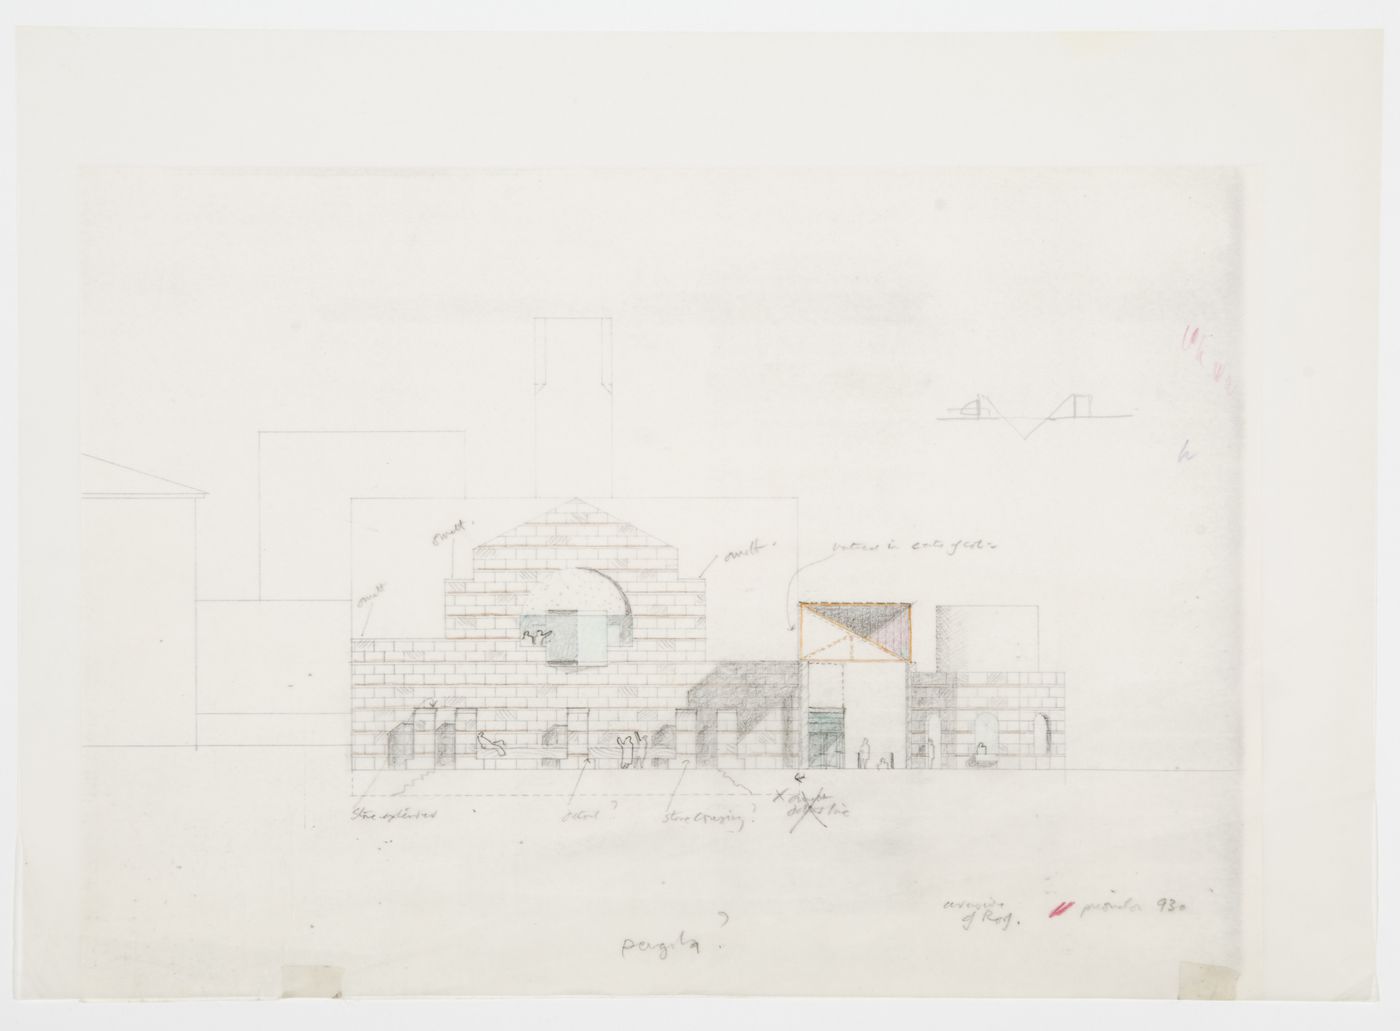 Center for Theatre Arts, Cornell University, Ithaca, New York: sectional elevation